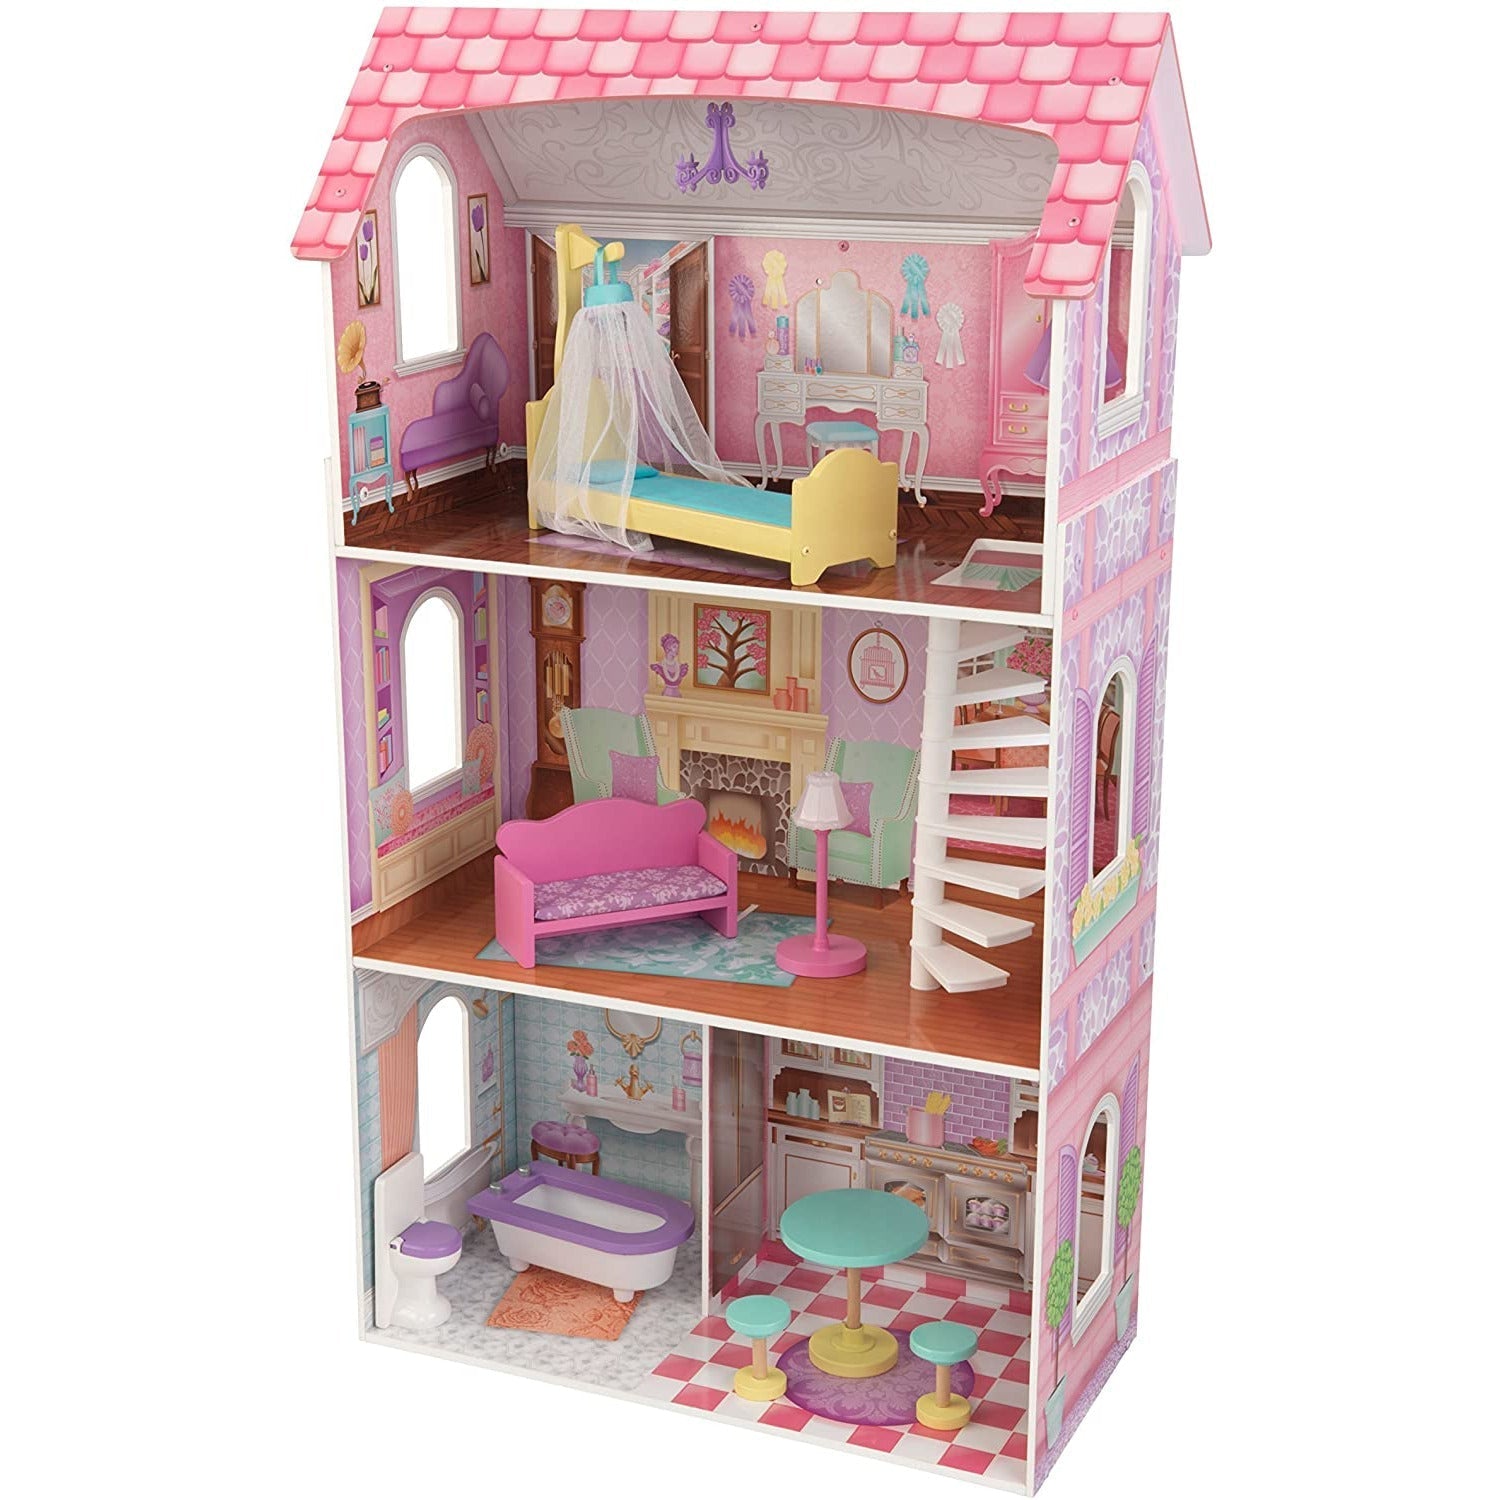 Dollhouse with Furniture for kids 110 x 65 x 33 cm (Model 2) - Little Kids Business